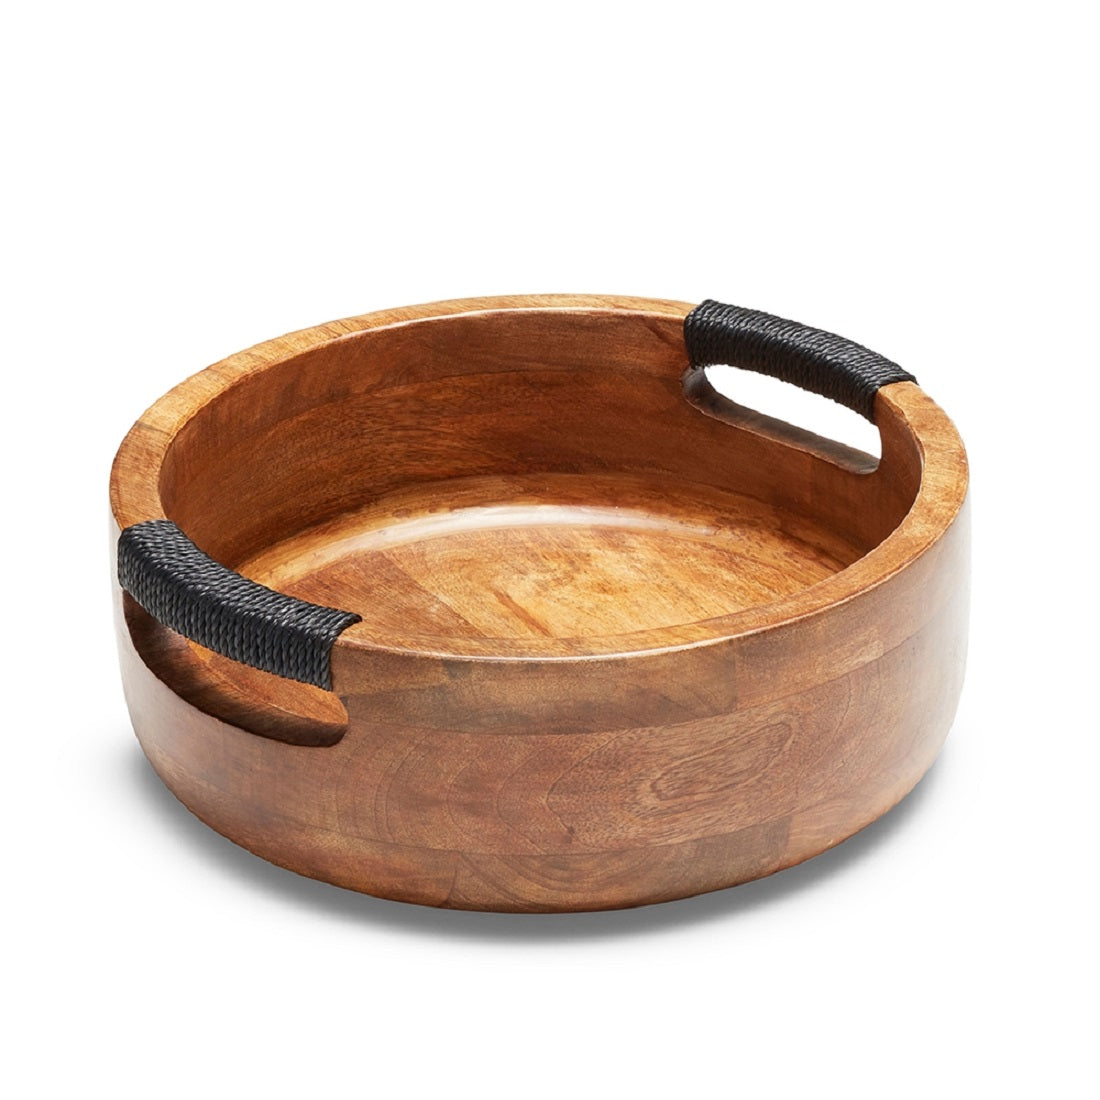 SWHF Pure Mango Wooden Salad/Fruit Bowl (Brown, Pack of 1) - SWHF